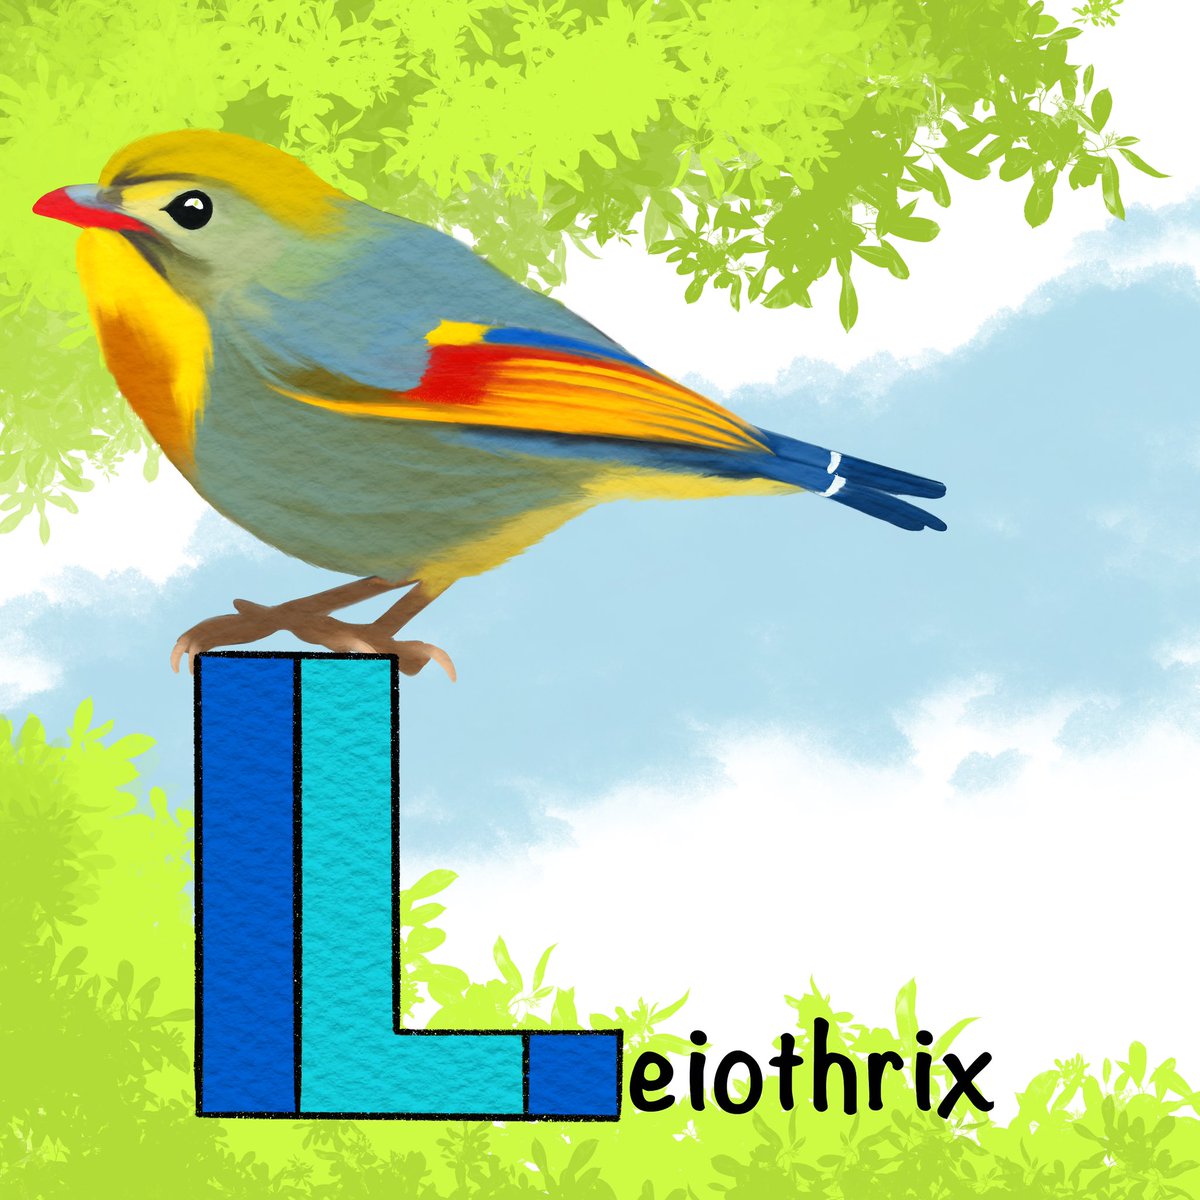 Day 12: Leiothrix of India
Illustration: Red-billed Leiothrix 
#bird #BirdTwitter #art #illustration #birdsofindia